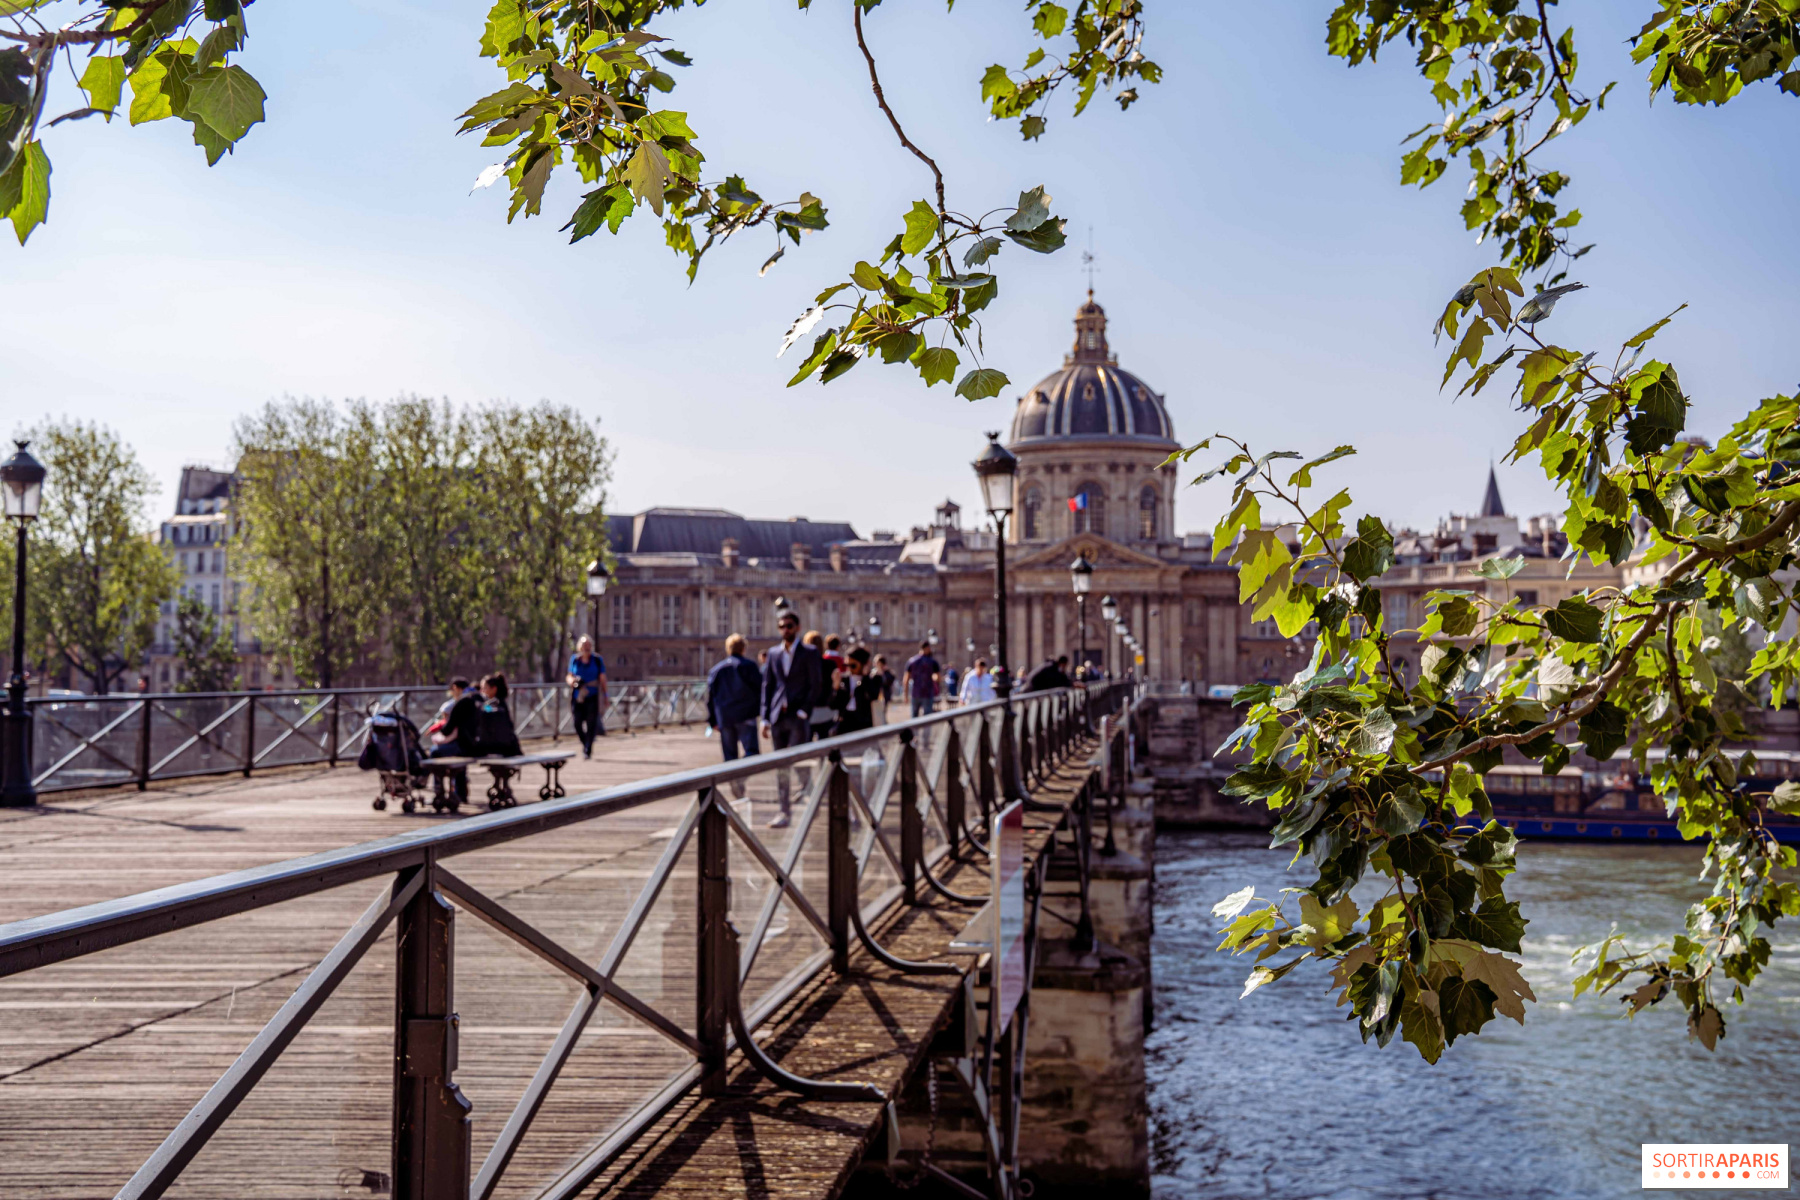 Paris: listed as historic monument, the Pont des Arts will be